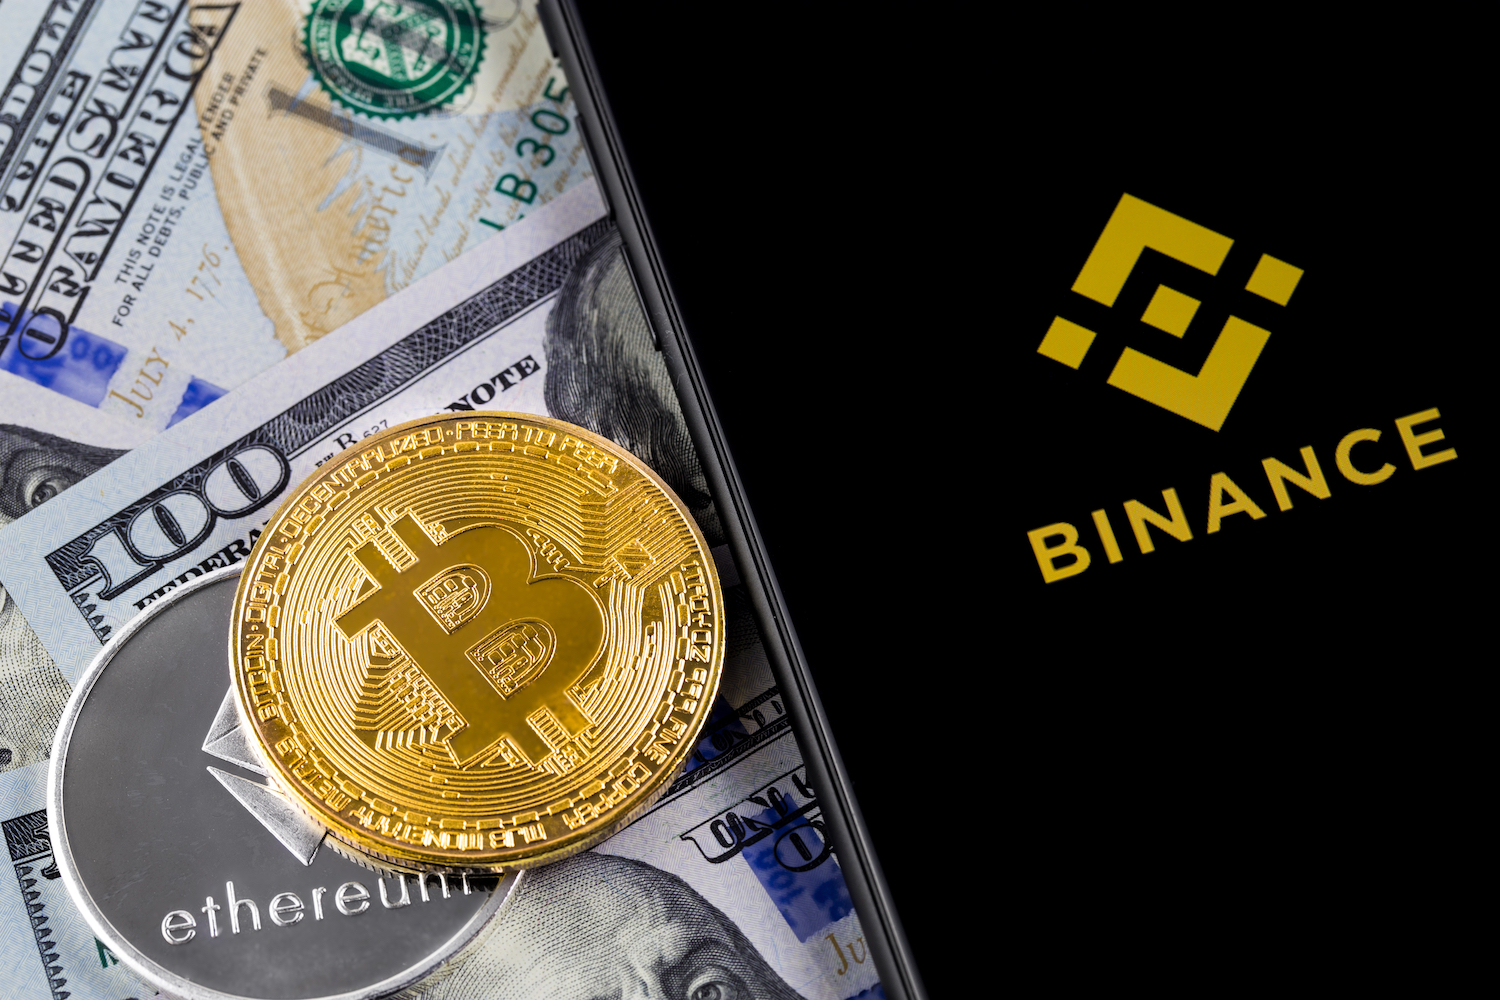 Binance To Add Fiat-to-Crypto OTC Trading In A Month, Co-Founder Says